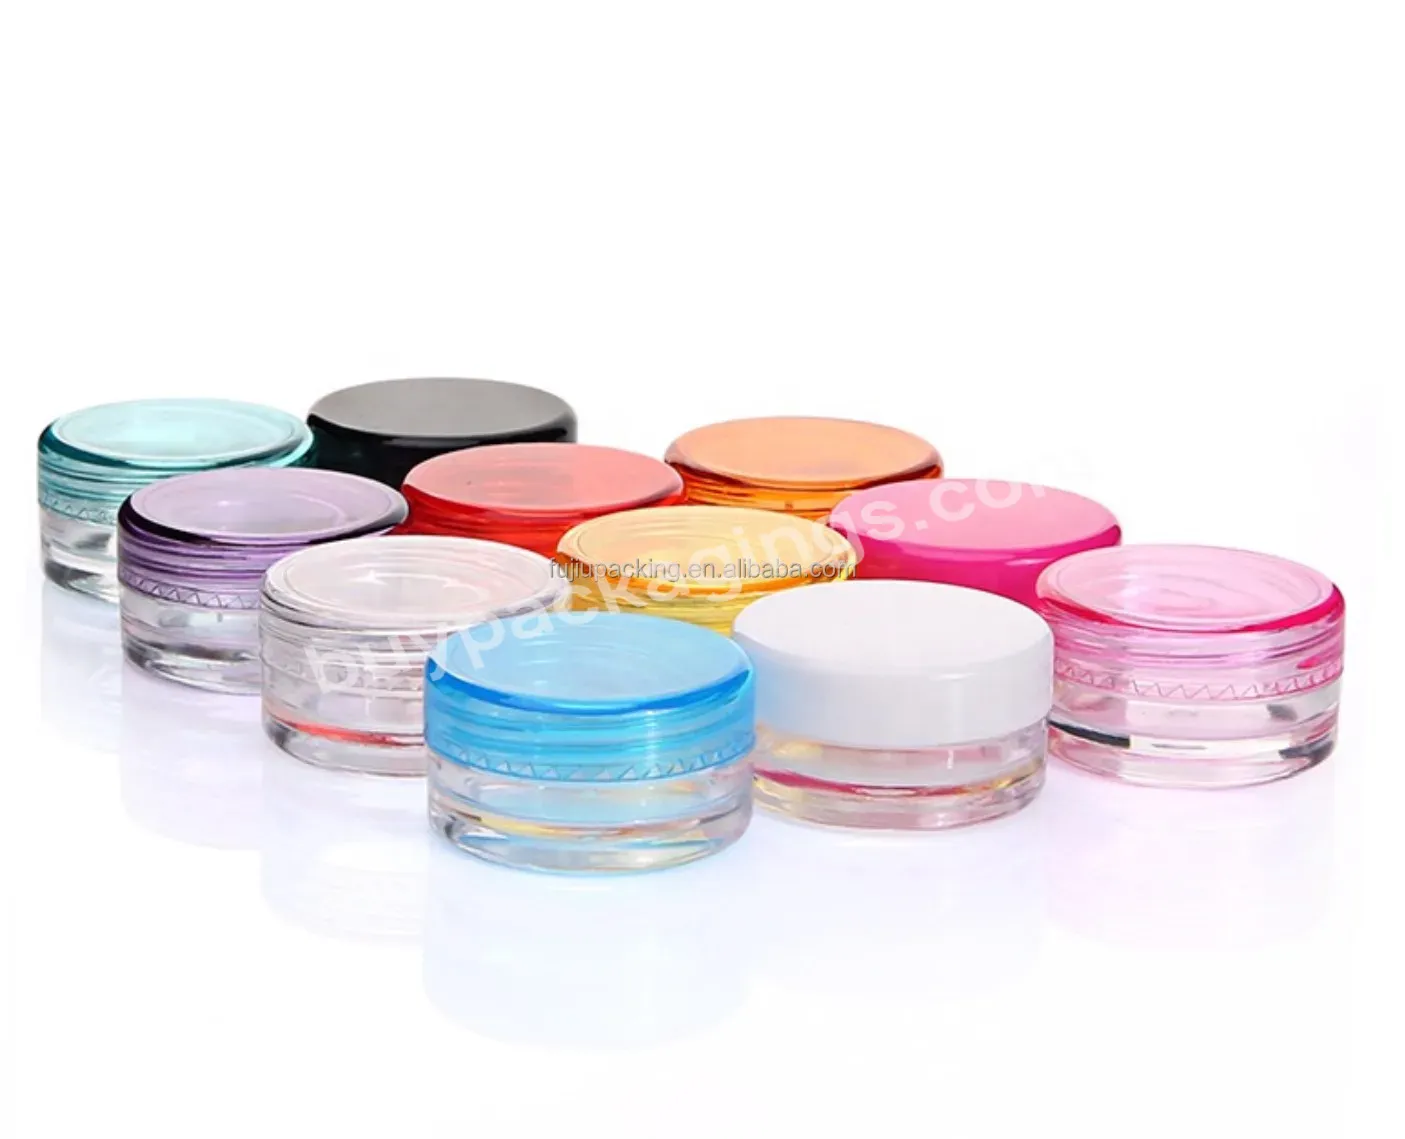 Factory Outlet 3g 5g 10g Small Clear Cream Jar Plastic Pot Box Mini Transparent Cosmetic Sample Container With Color Lids - Buy 3g 5g 10g Small Clear Cream Jar,Pot Box Mini Cosmetic Sample Jar,Plastic Jar Color Lids.